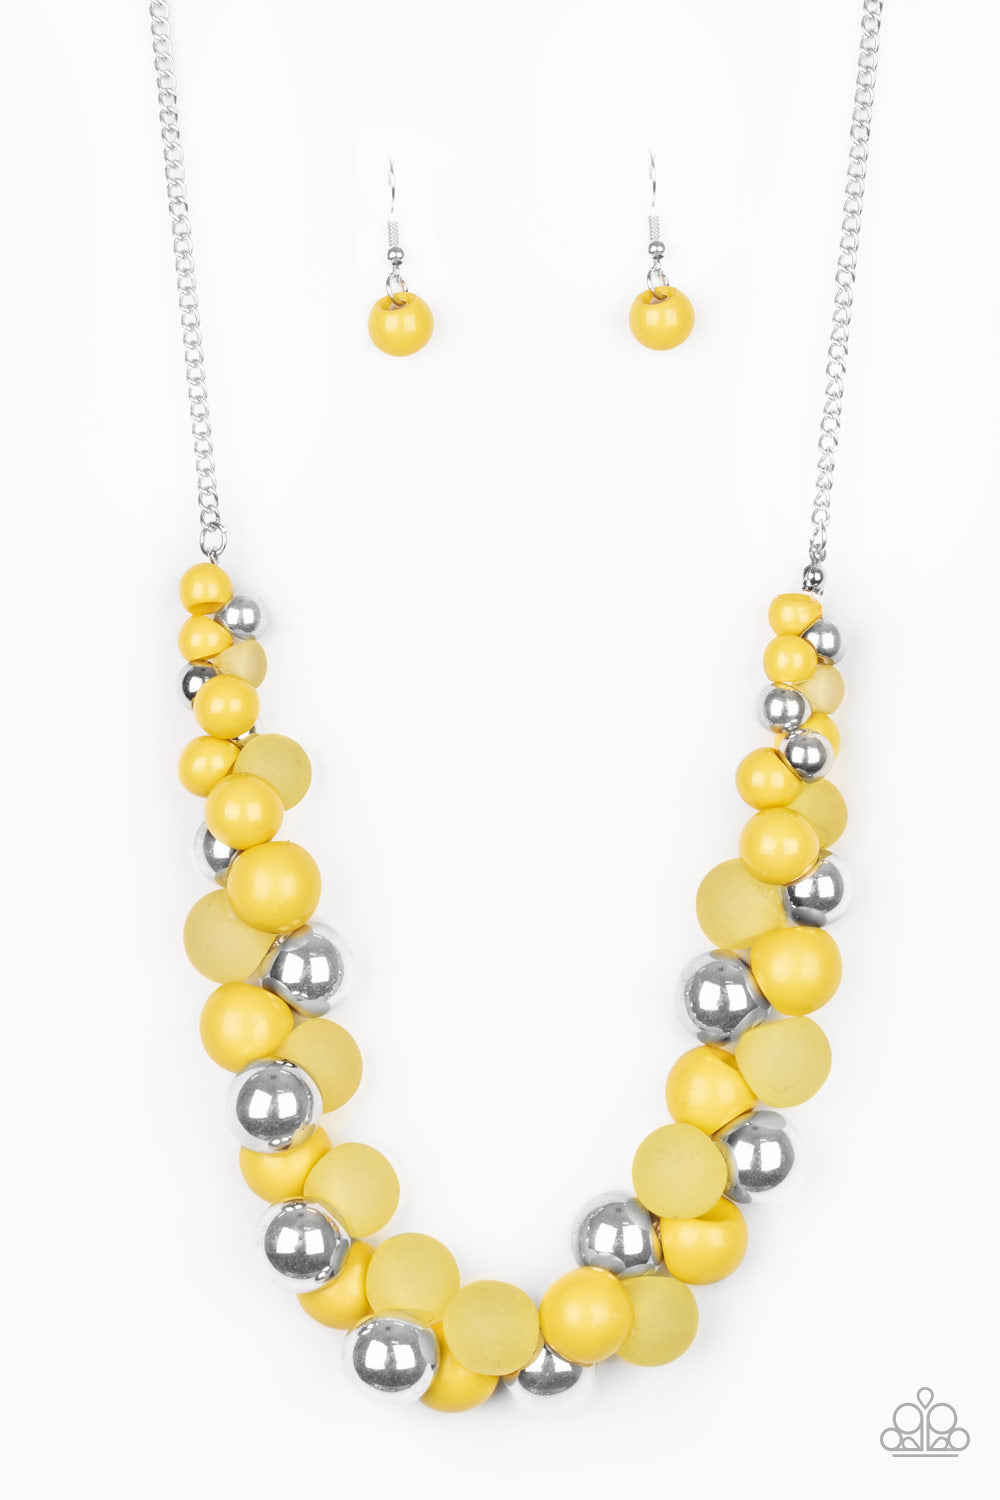 shop-sassy-affordable- bubbly-brilliance-yellow-paparazzi-accessories